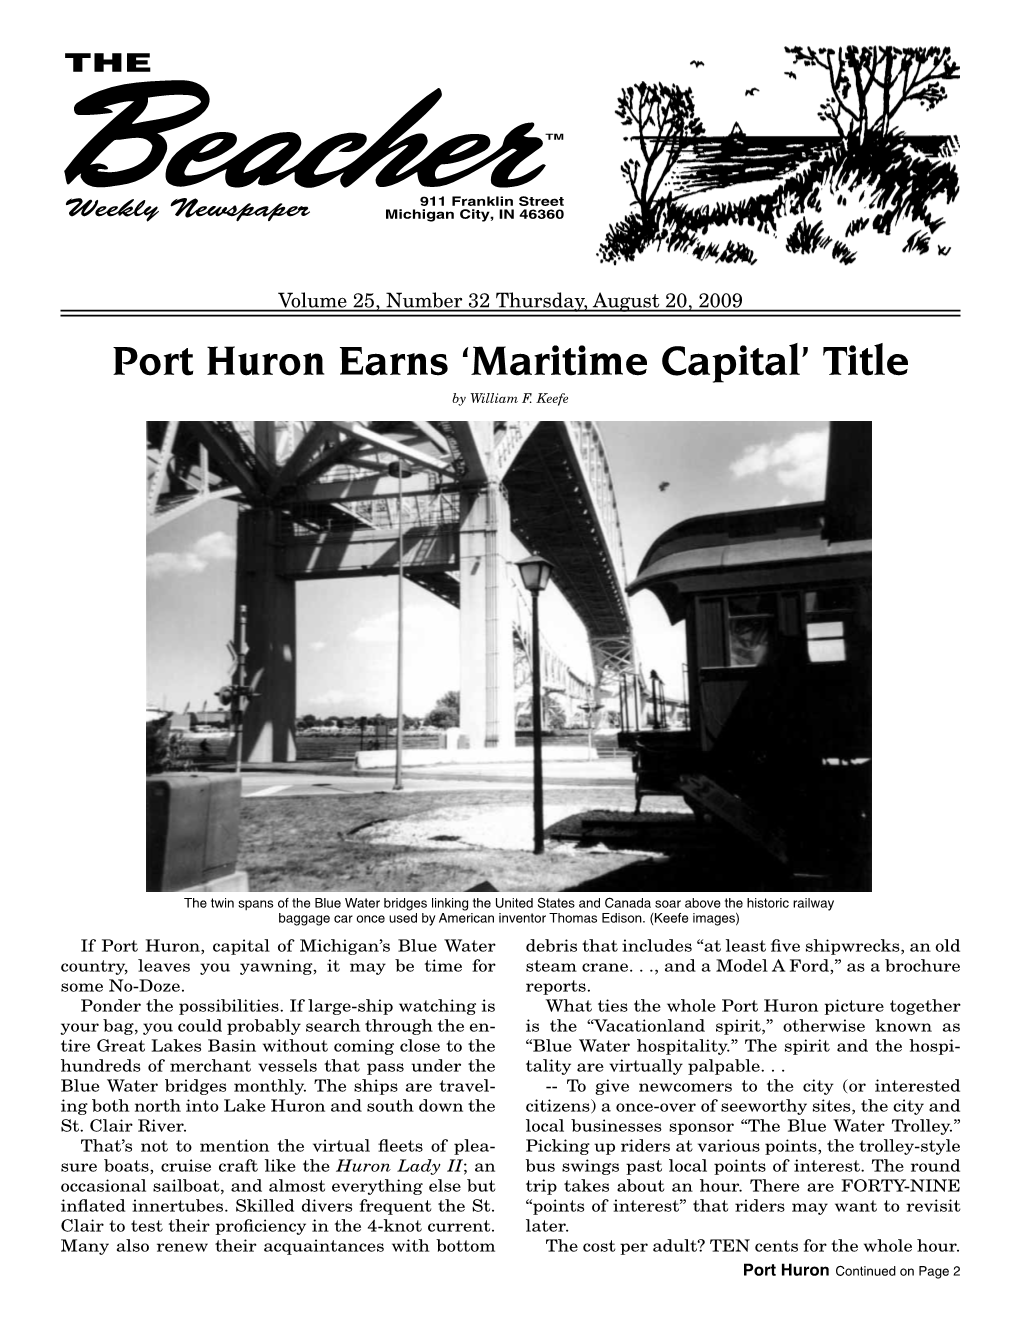 Maritime Capital’ Title by William F